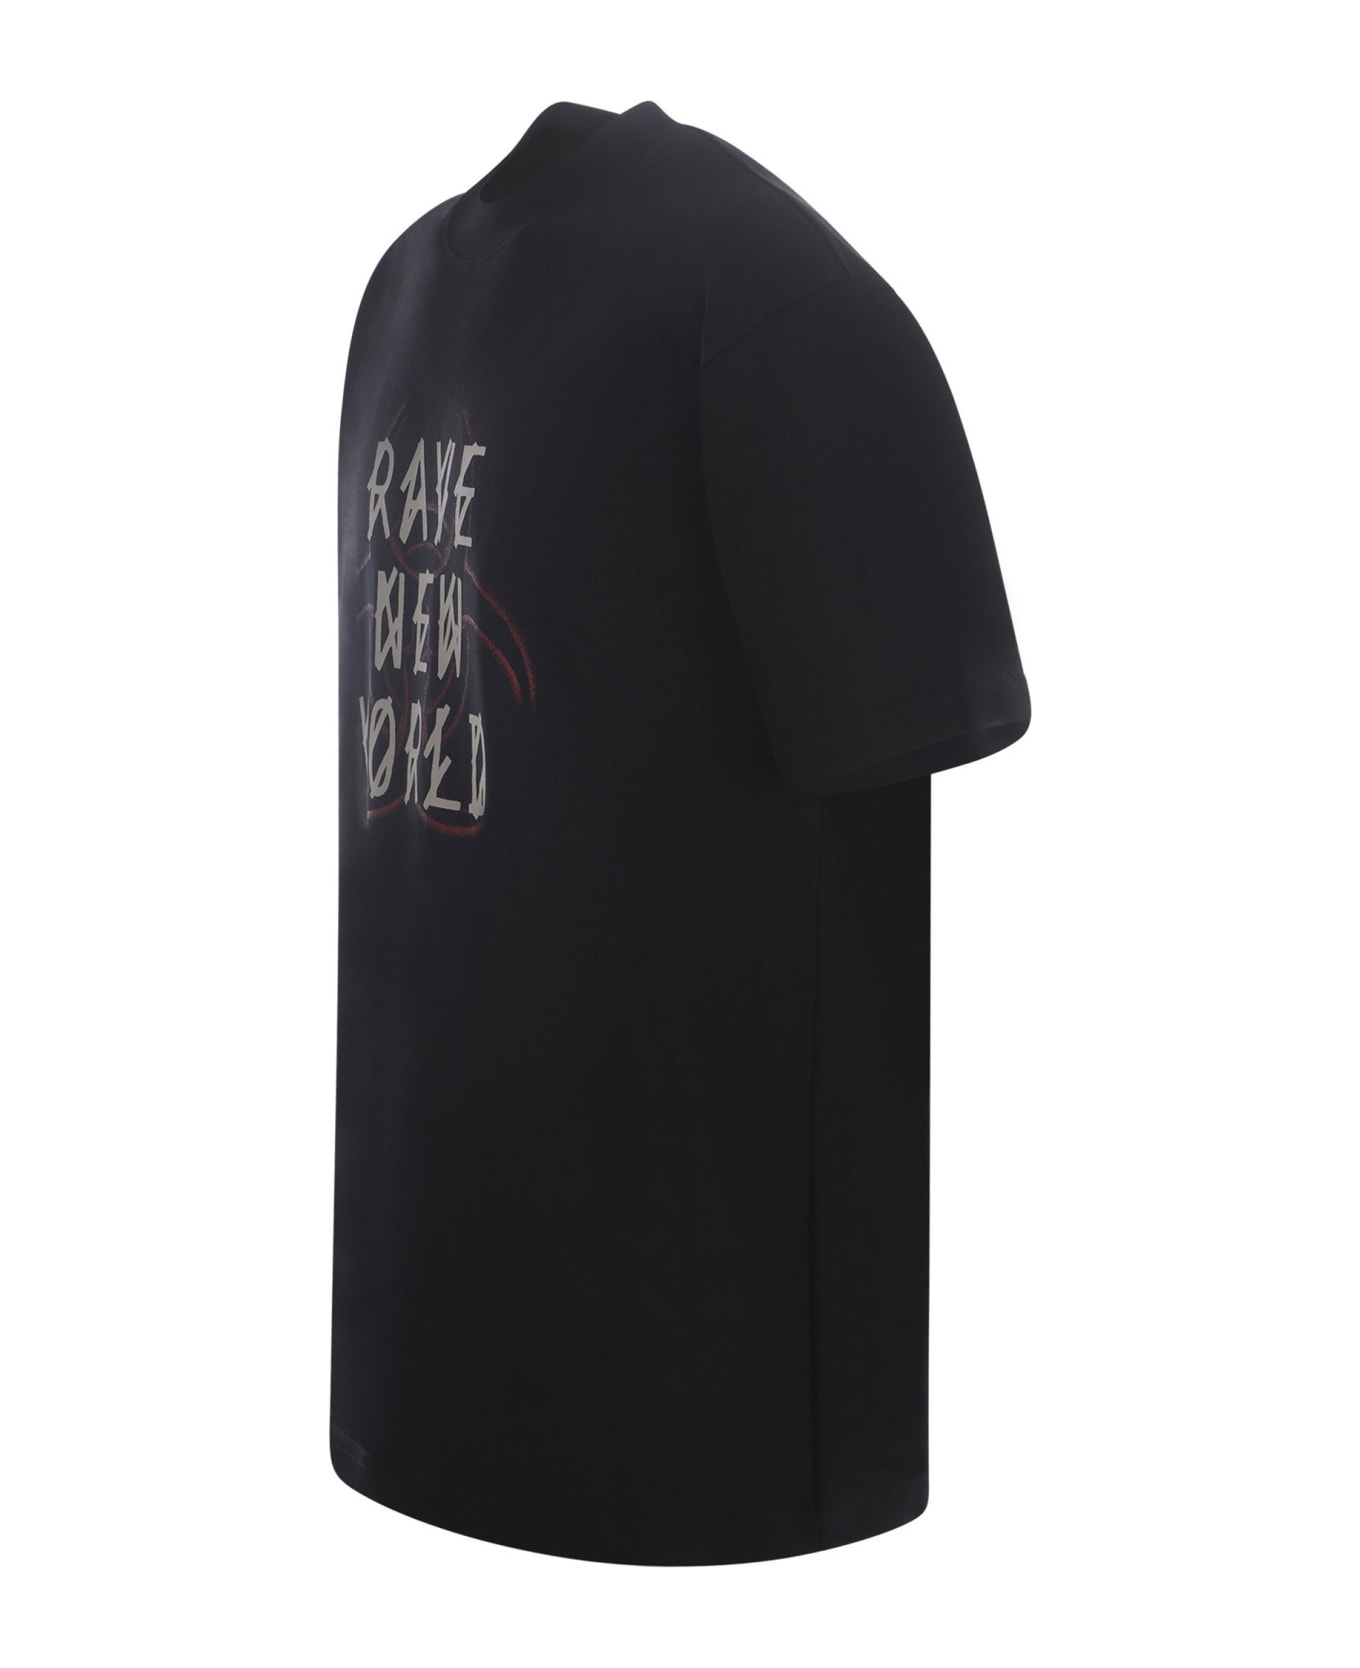 44 Label Group T-shirt 44label Group In Cotton - Nero